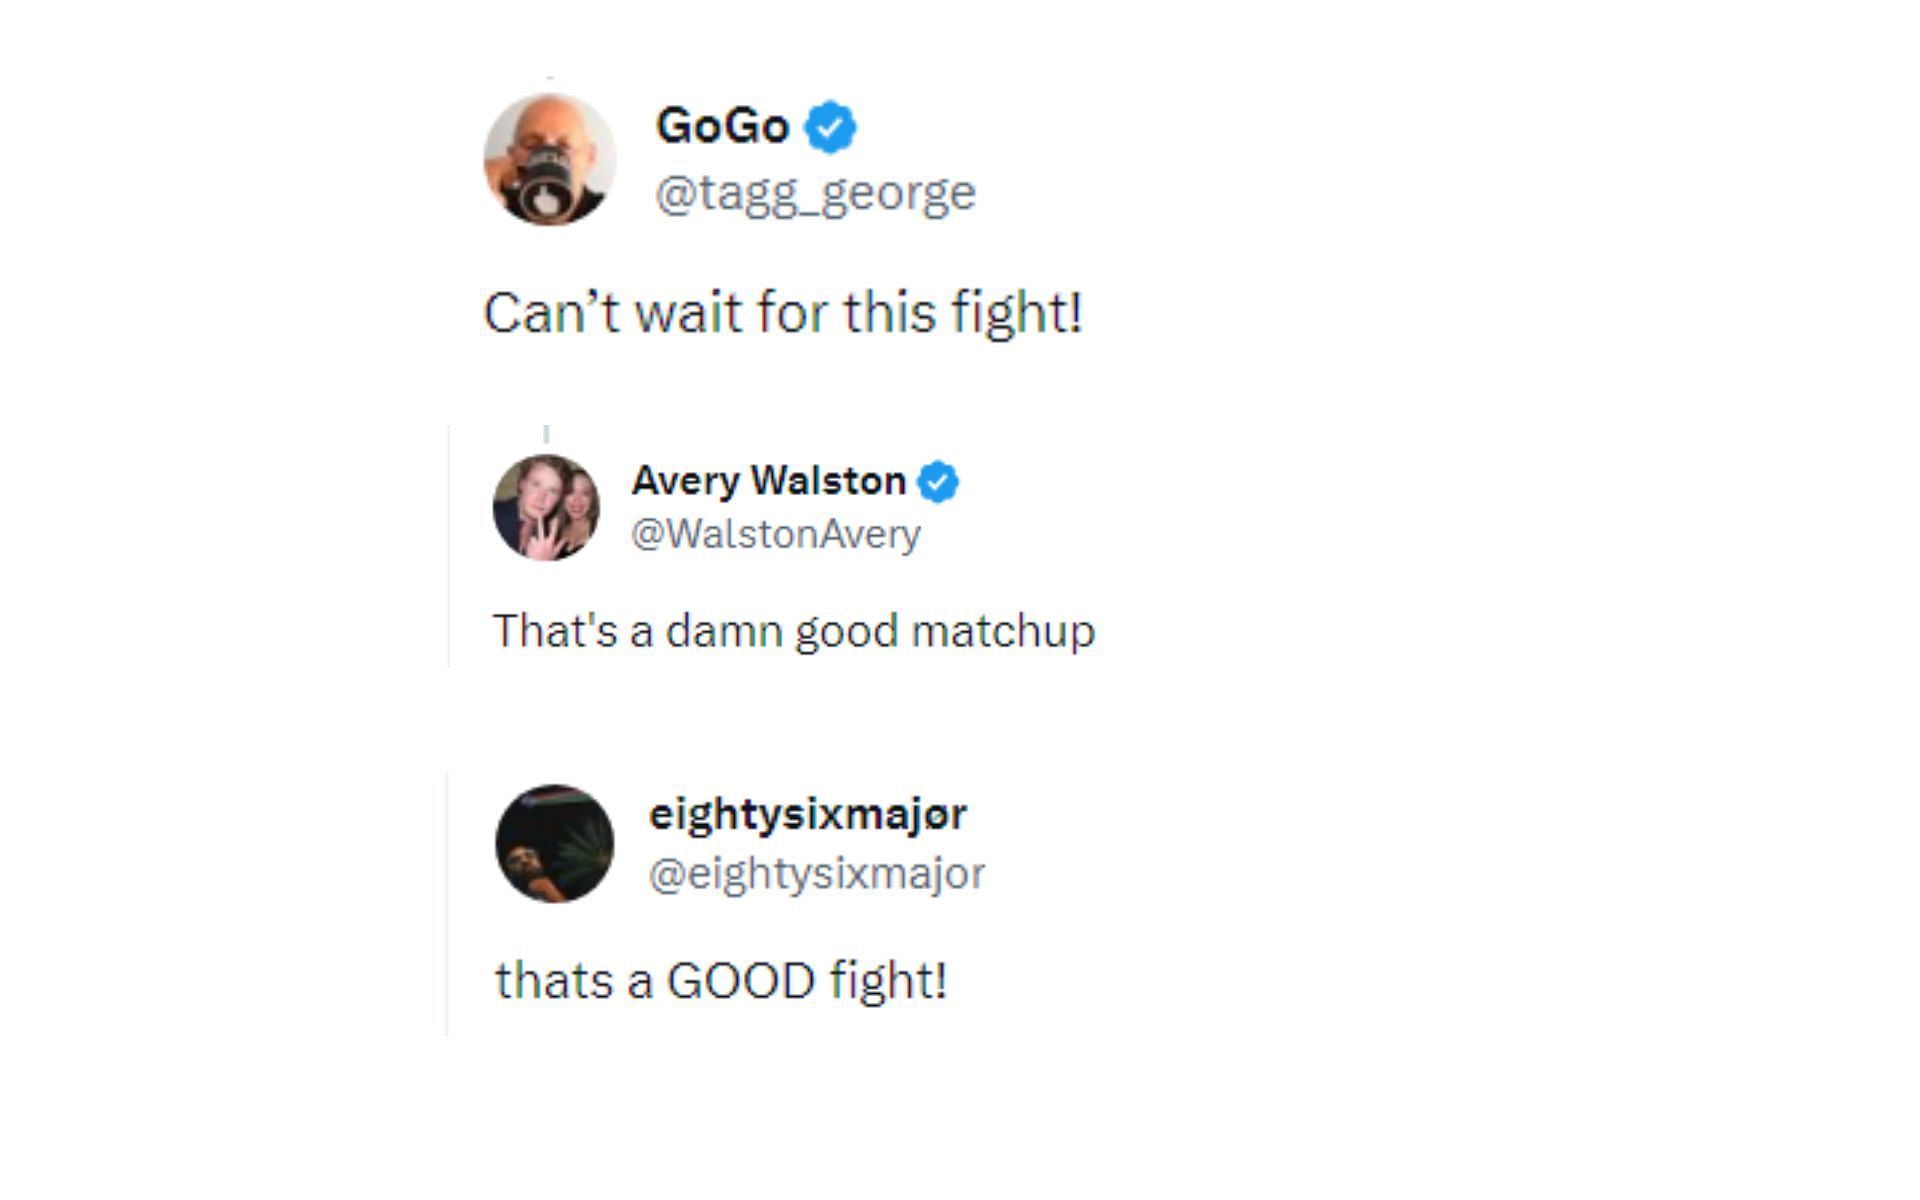 Tweets reacting to potential bout at UFC 297